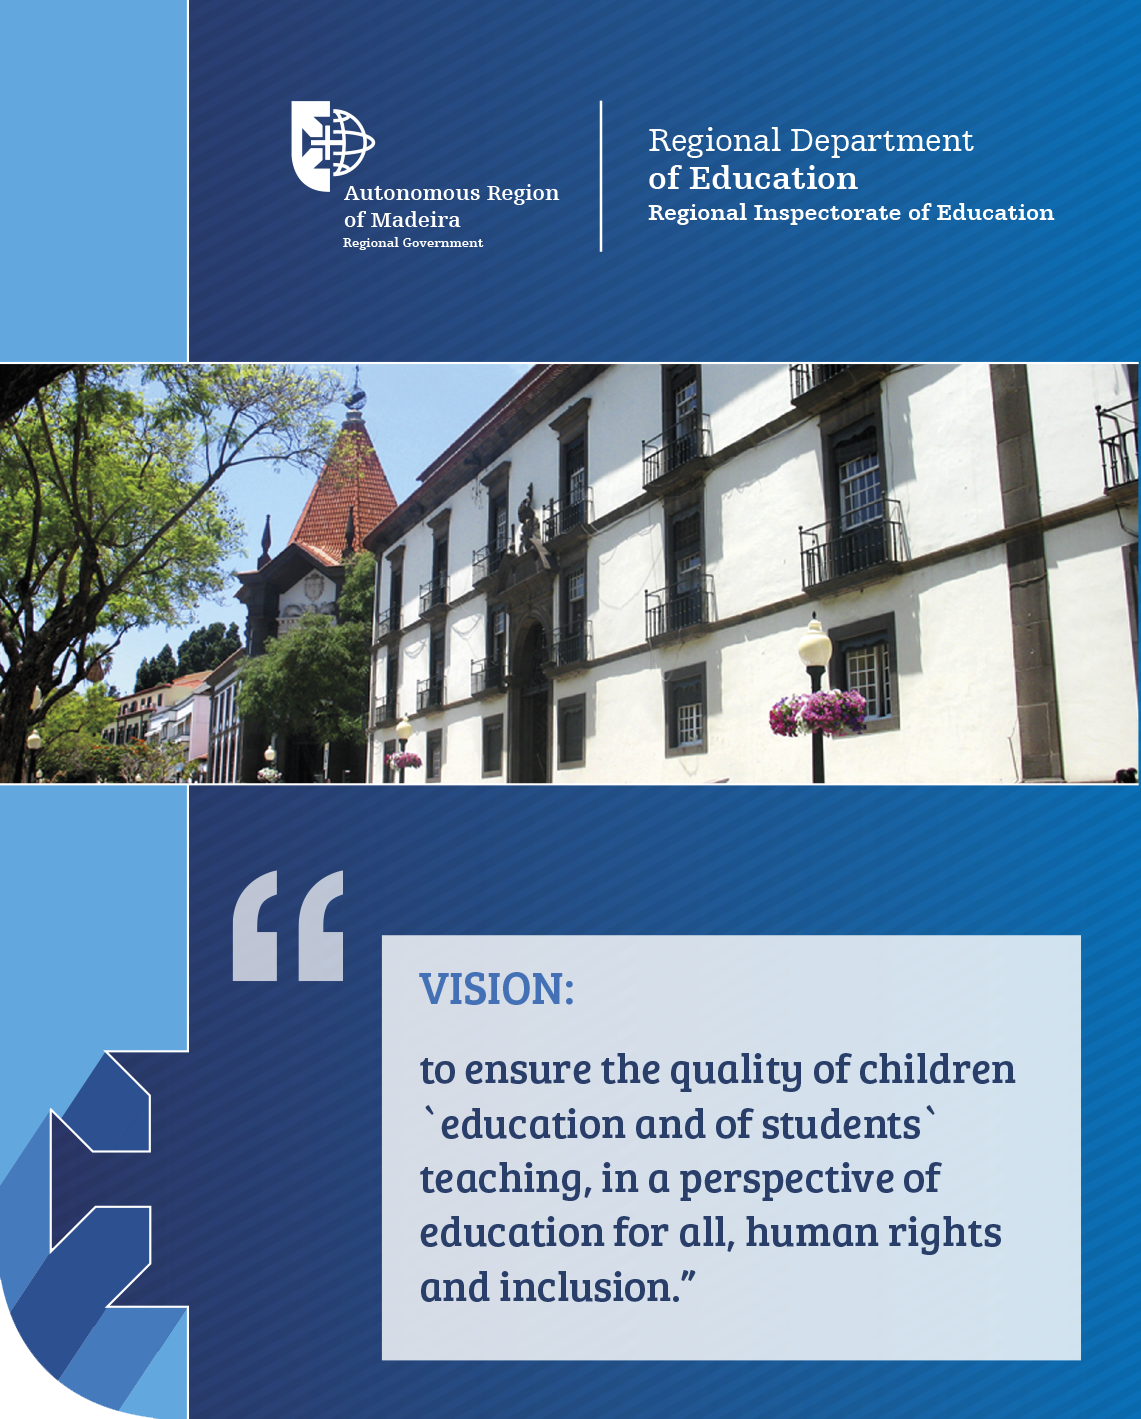 Vision of the Regional Inspectorate of Education